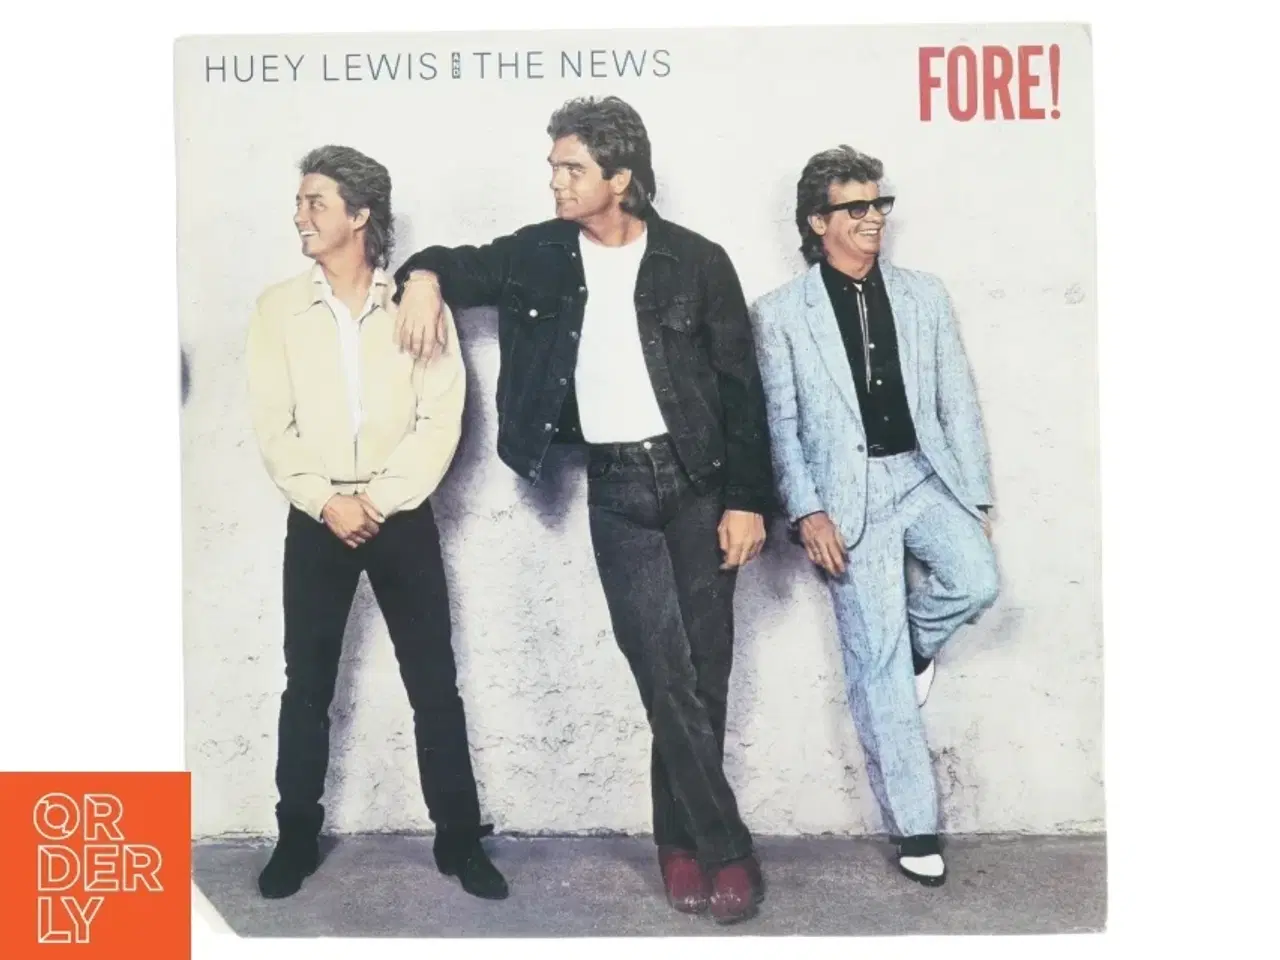 Billede 1 - Huey Lewis and The News - 'Fore!' vinylplade fra Chrysalis Records (str. 31 x 31 cm)